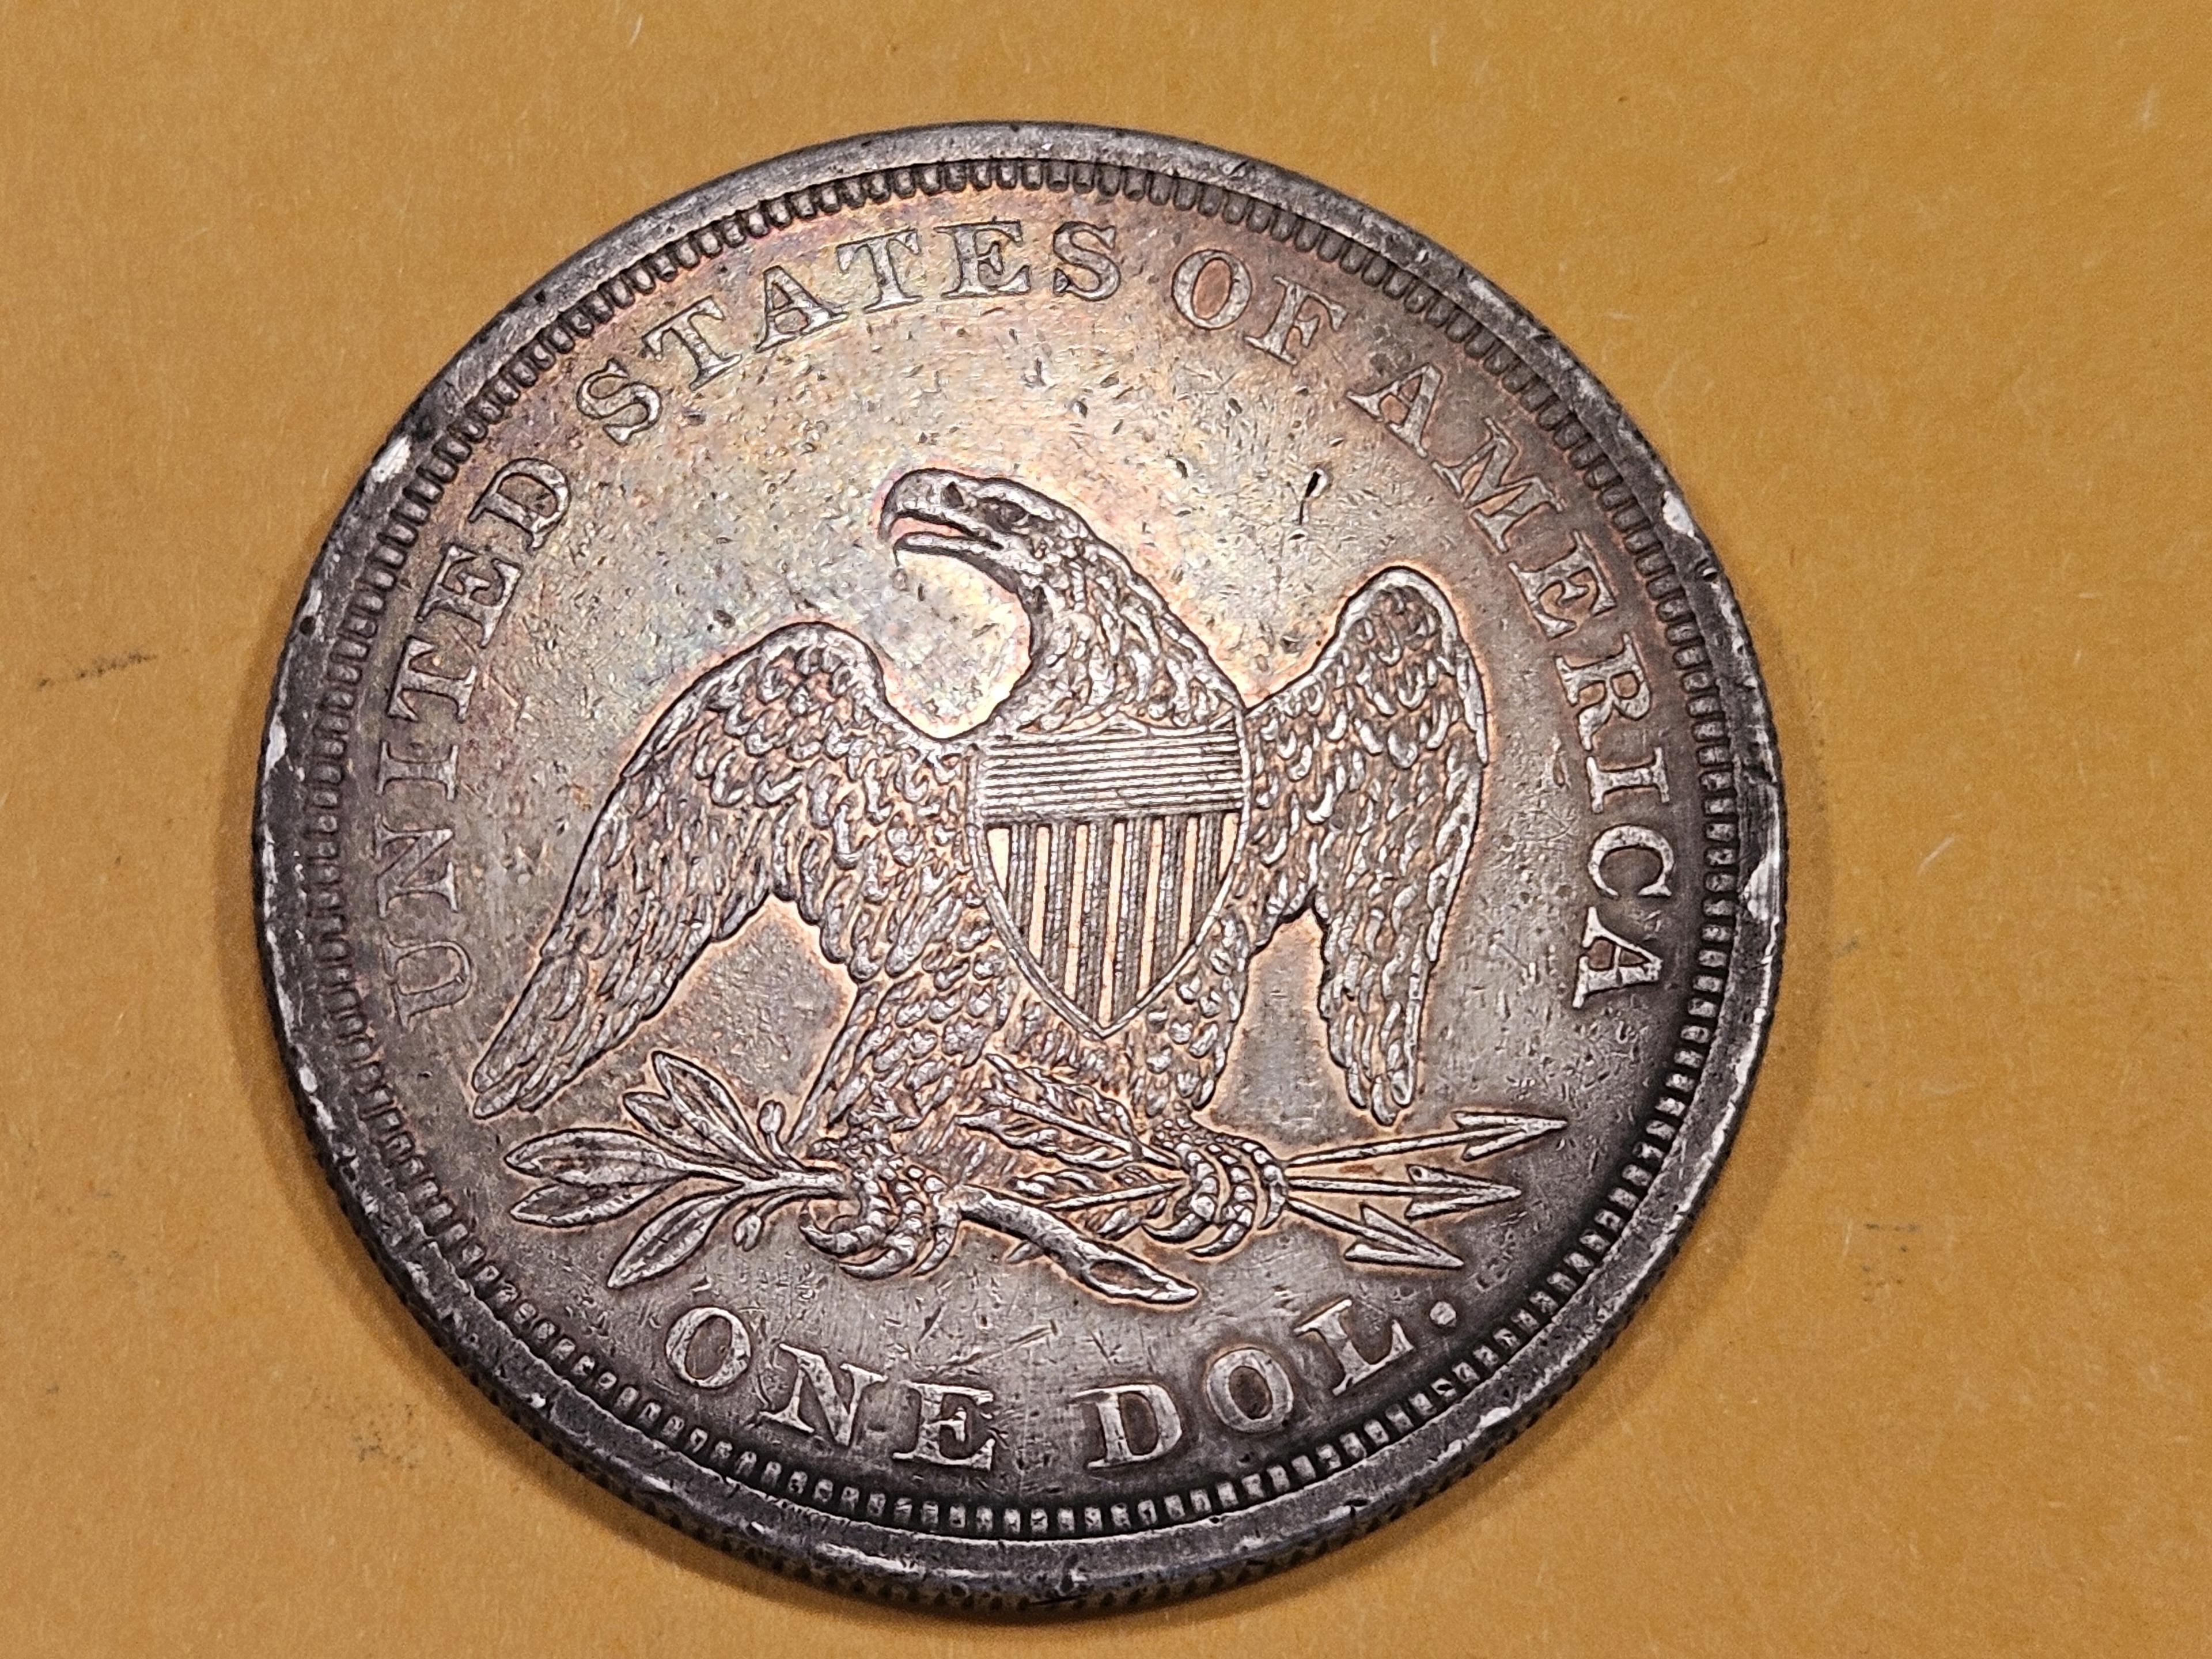 ** HIGHLIGHT *** 1859 Seated Dollar in About Uncirculated